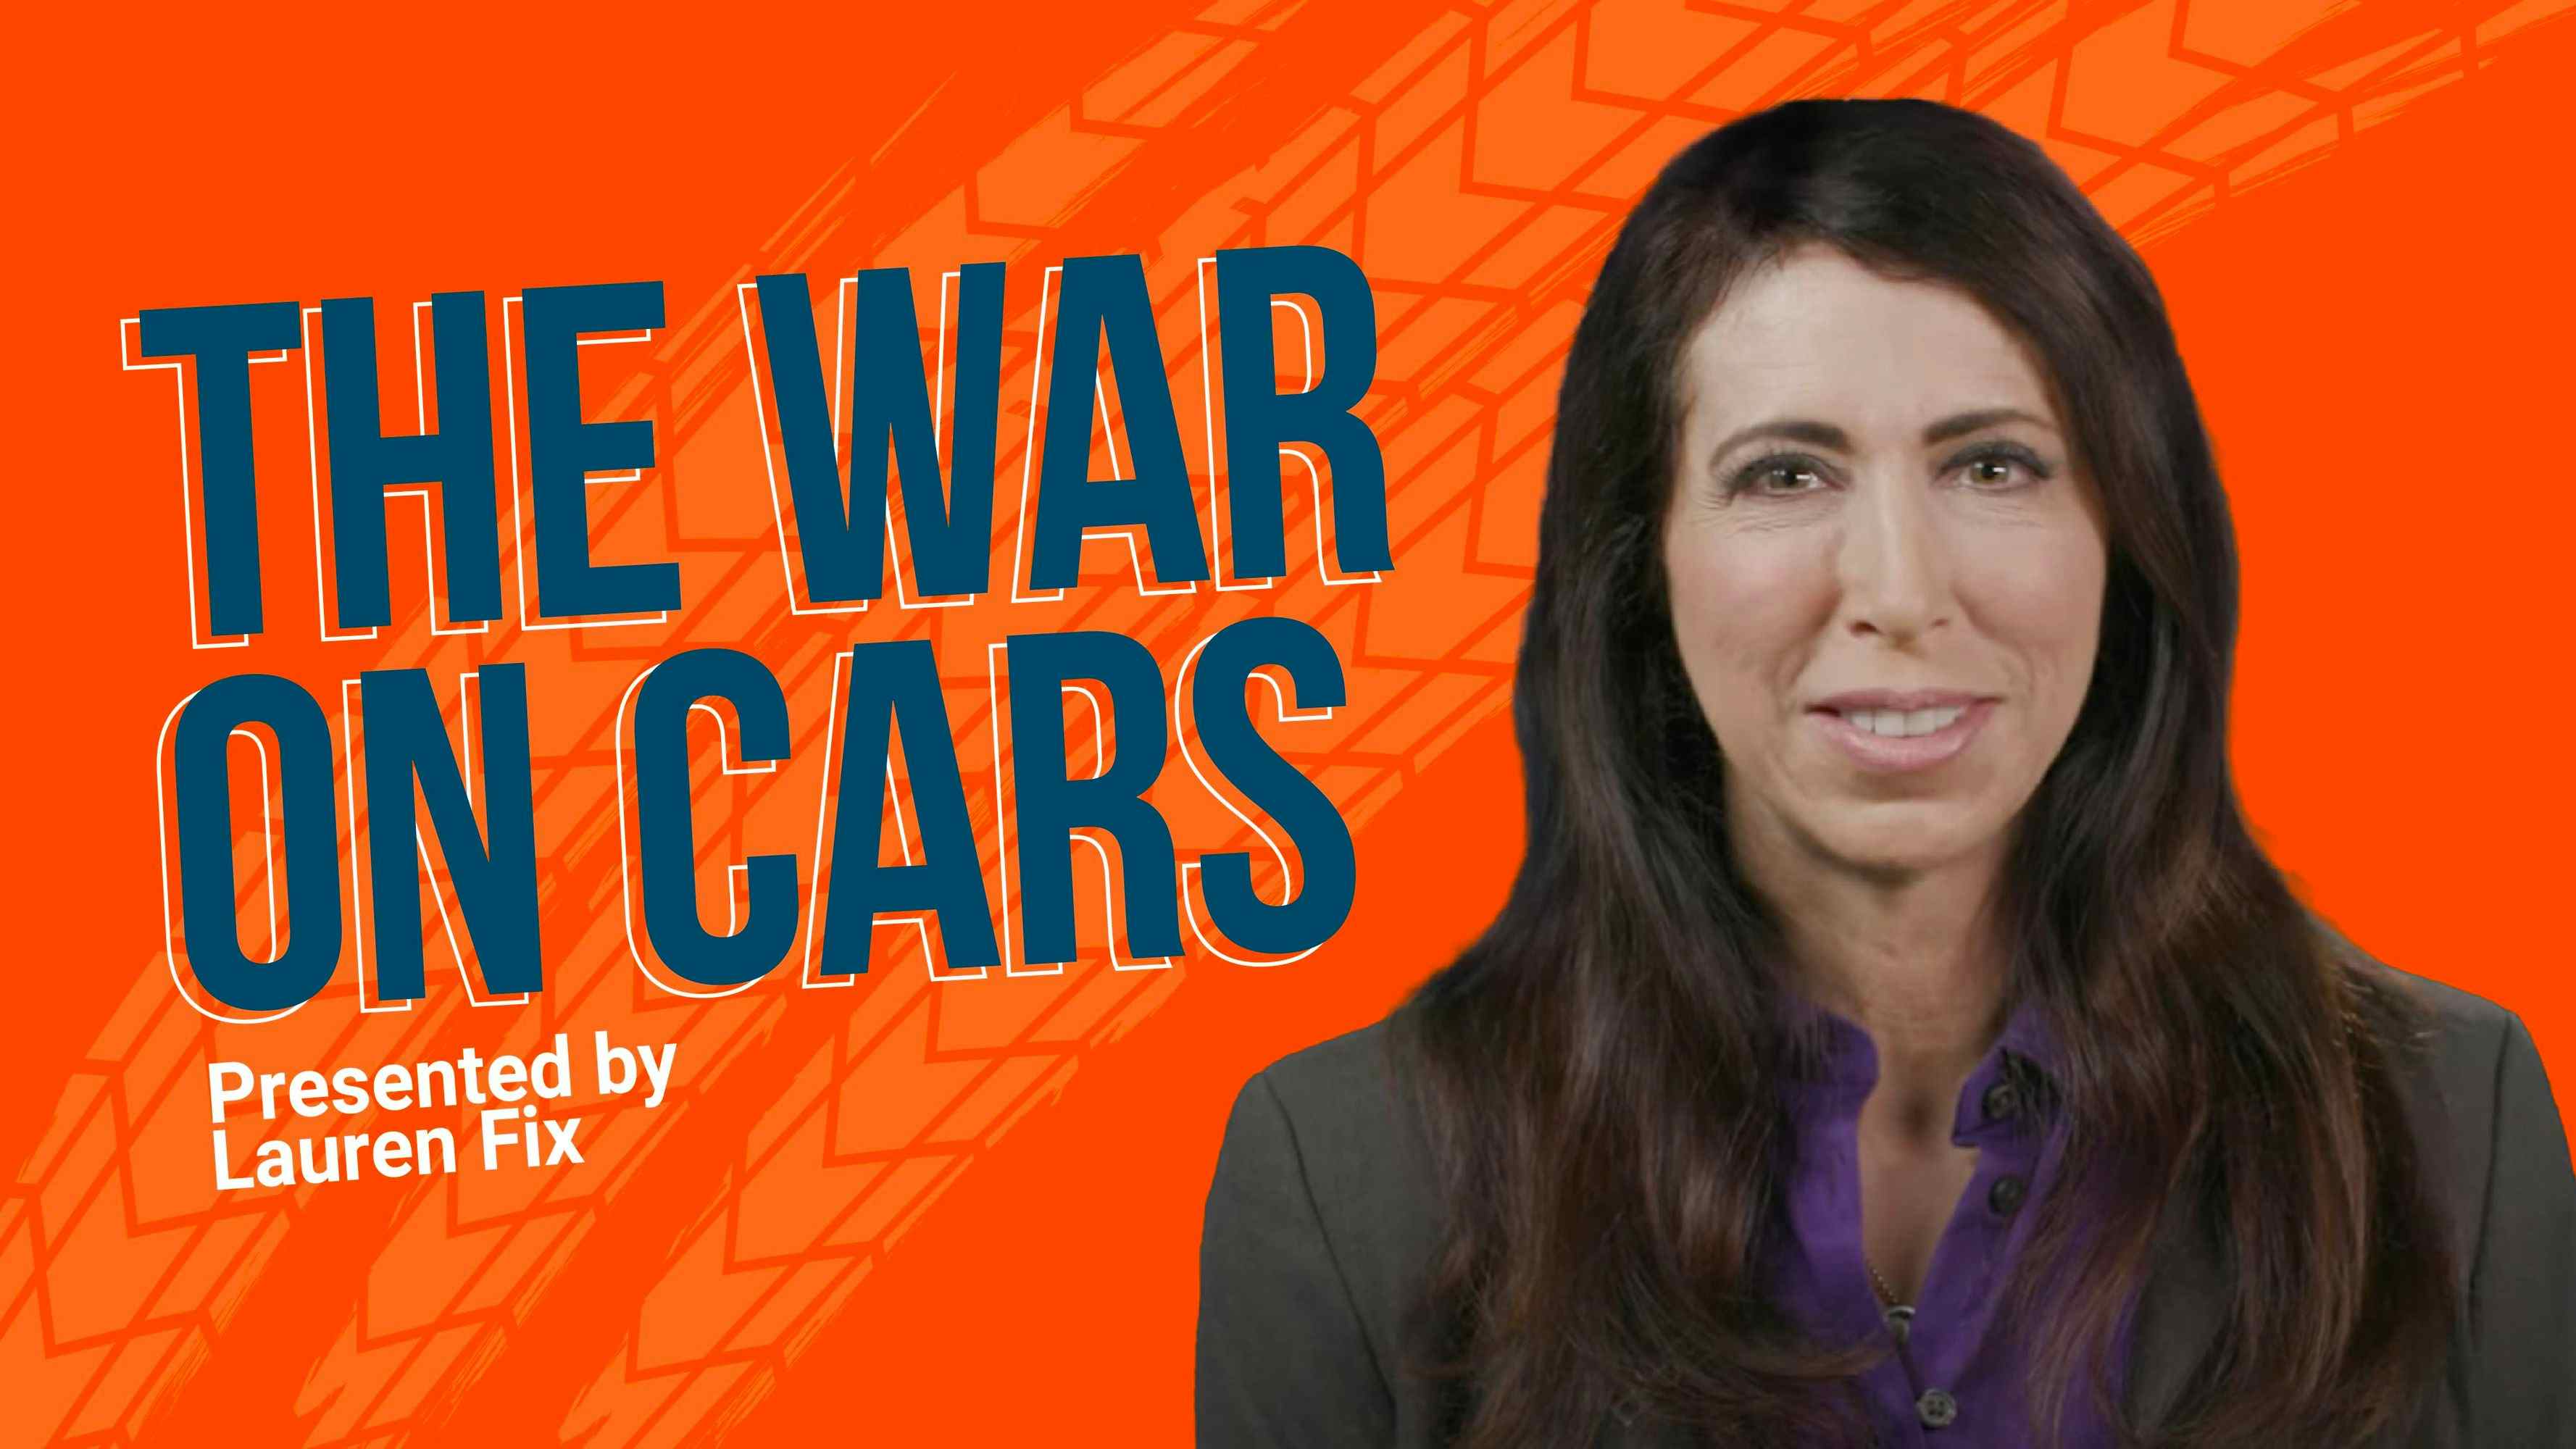 The War On Cars